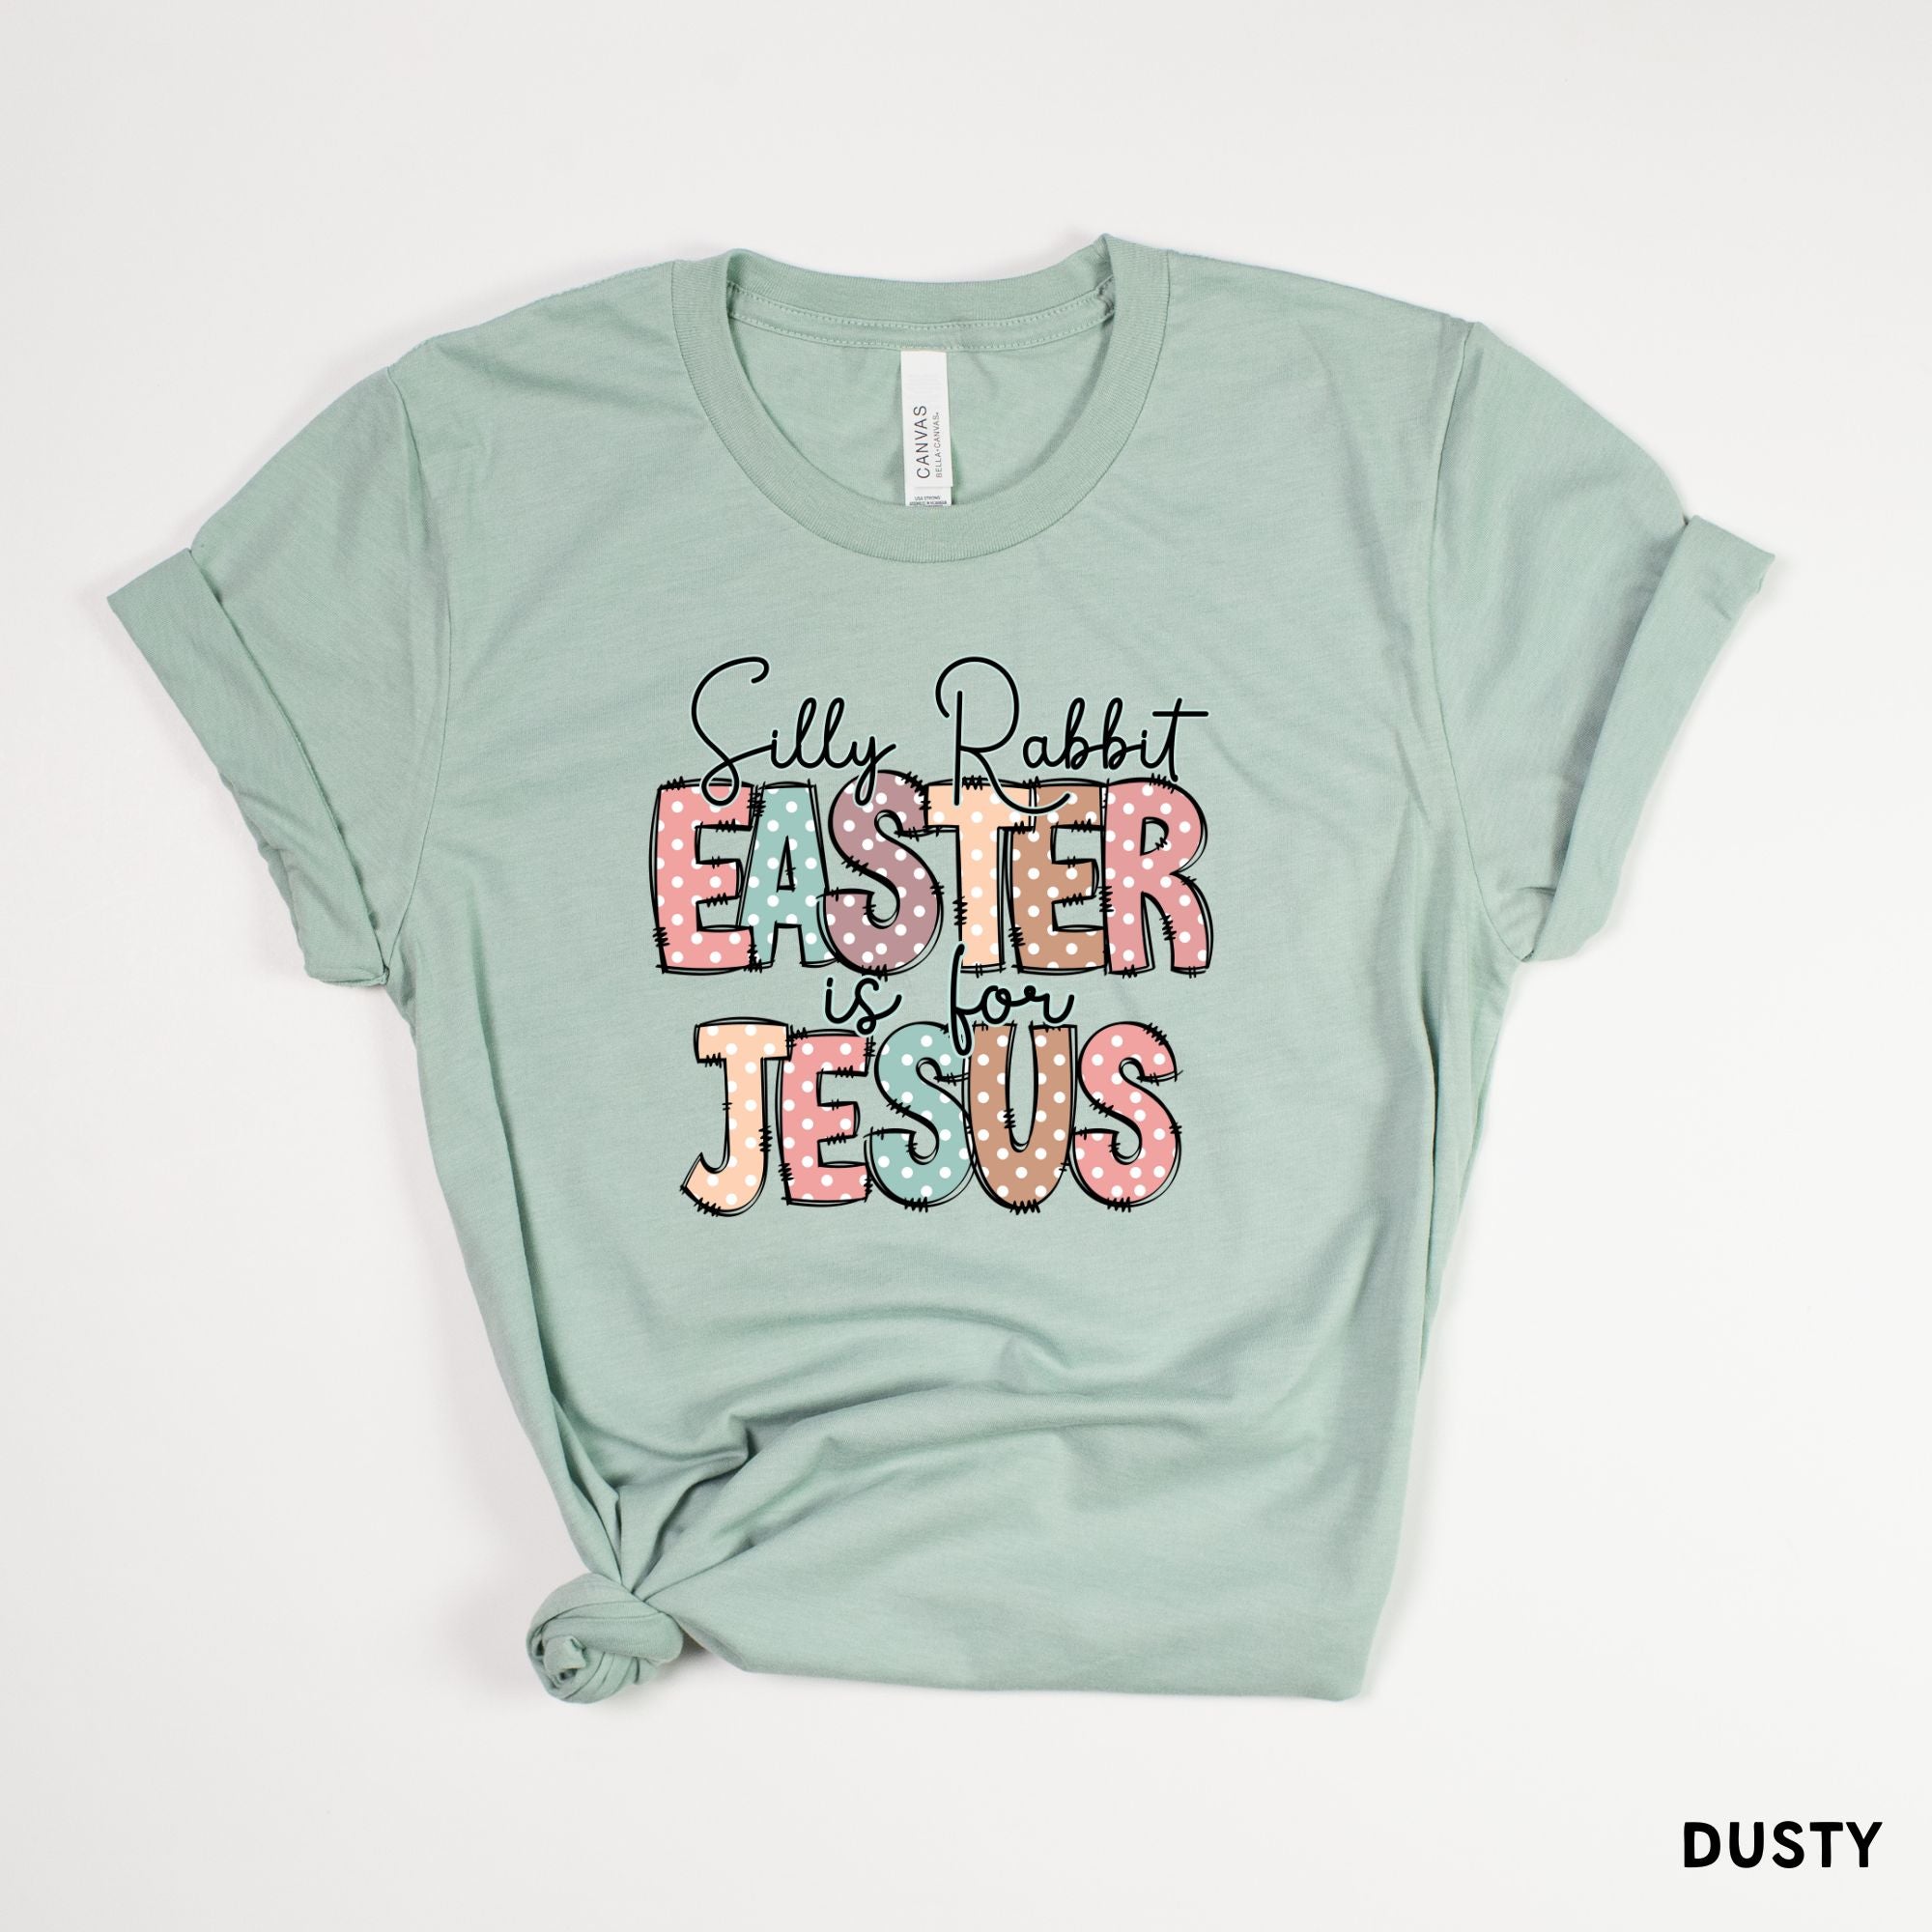 Silly Rabbit Tee for Women *UNISEX FIT*-208 Tees Wholesale, Idaho